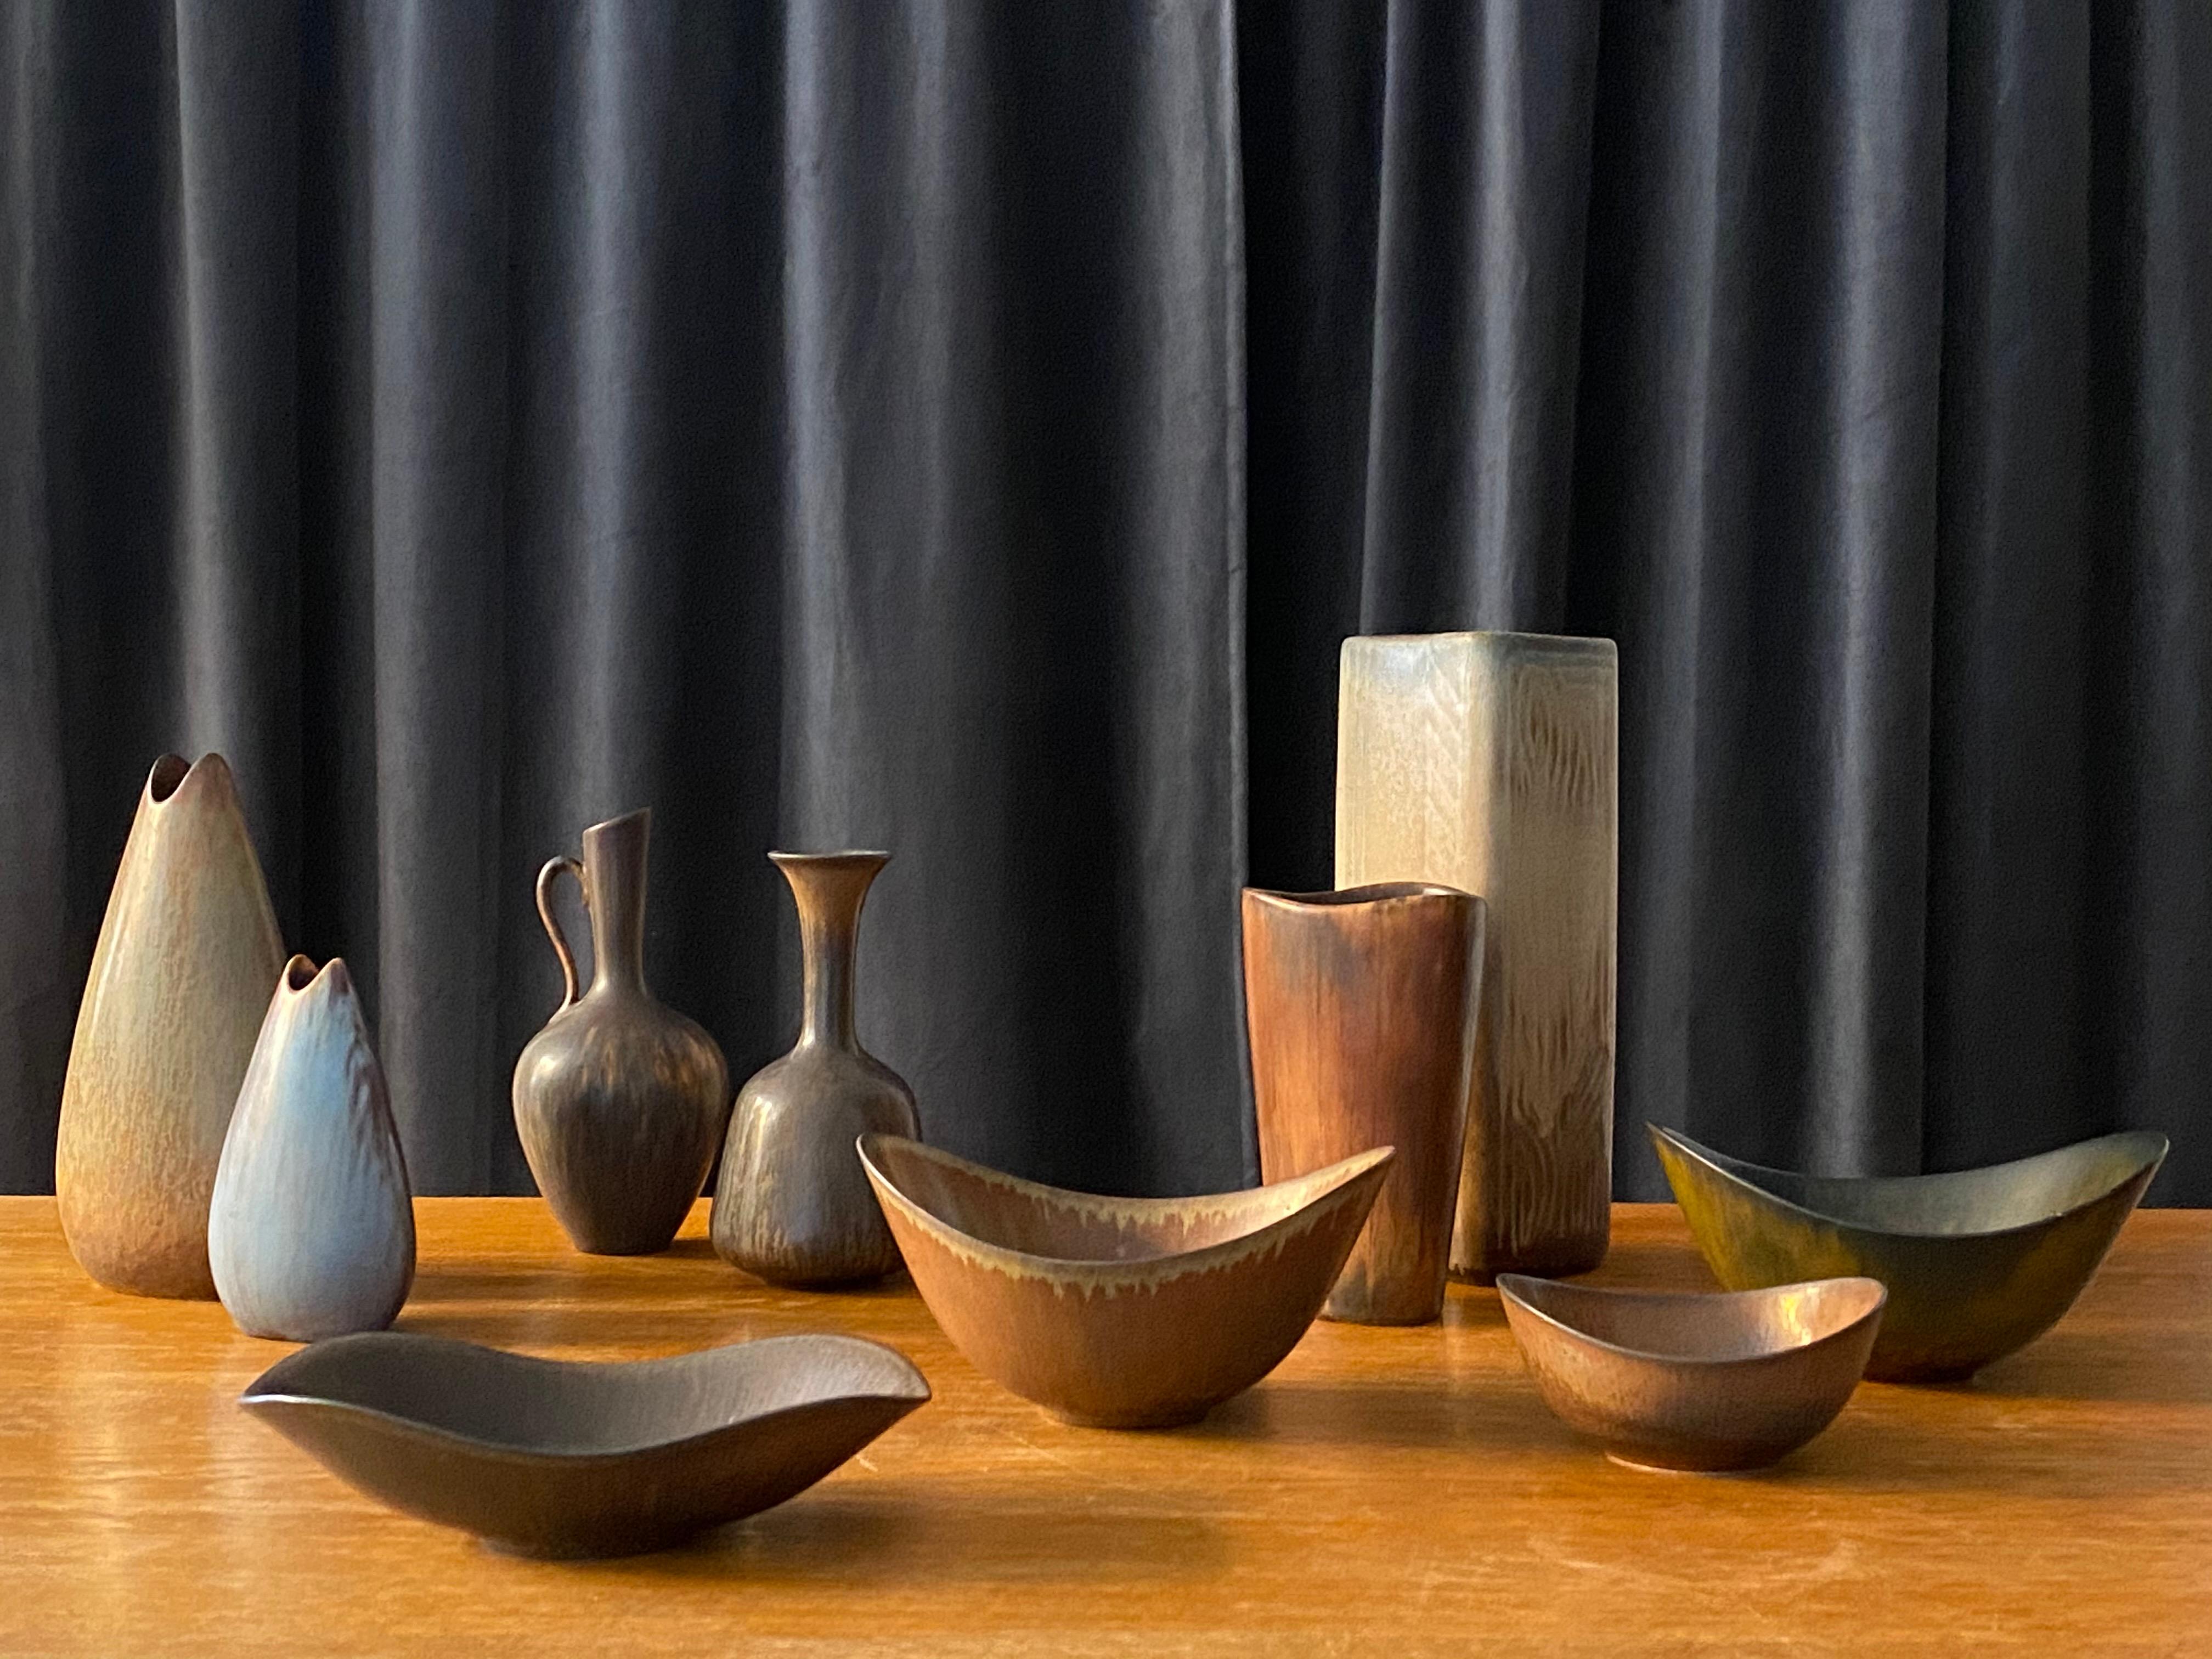 A collection of 10 vases and bowls executed in stoneware and produced by Rörstrands, Sweden, 1940s. Designed and signed by Gunnar Nylund, (Swedish 1914-1997). All vases with highly artistic glazes and colors include brown, black, grey and blue. All